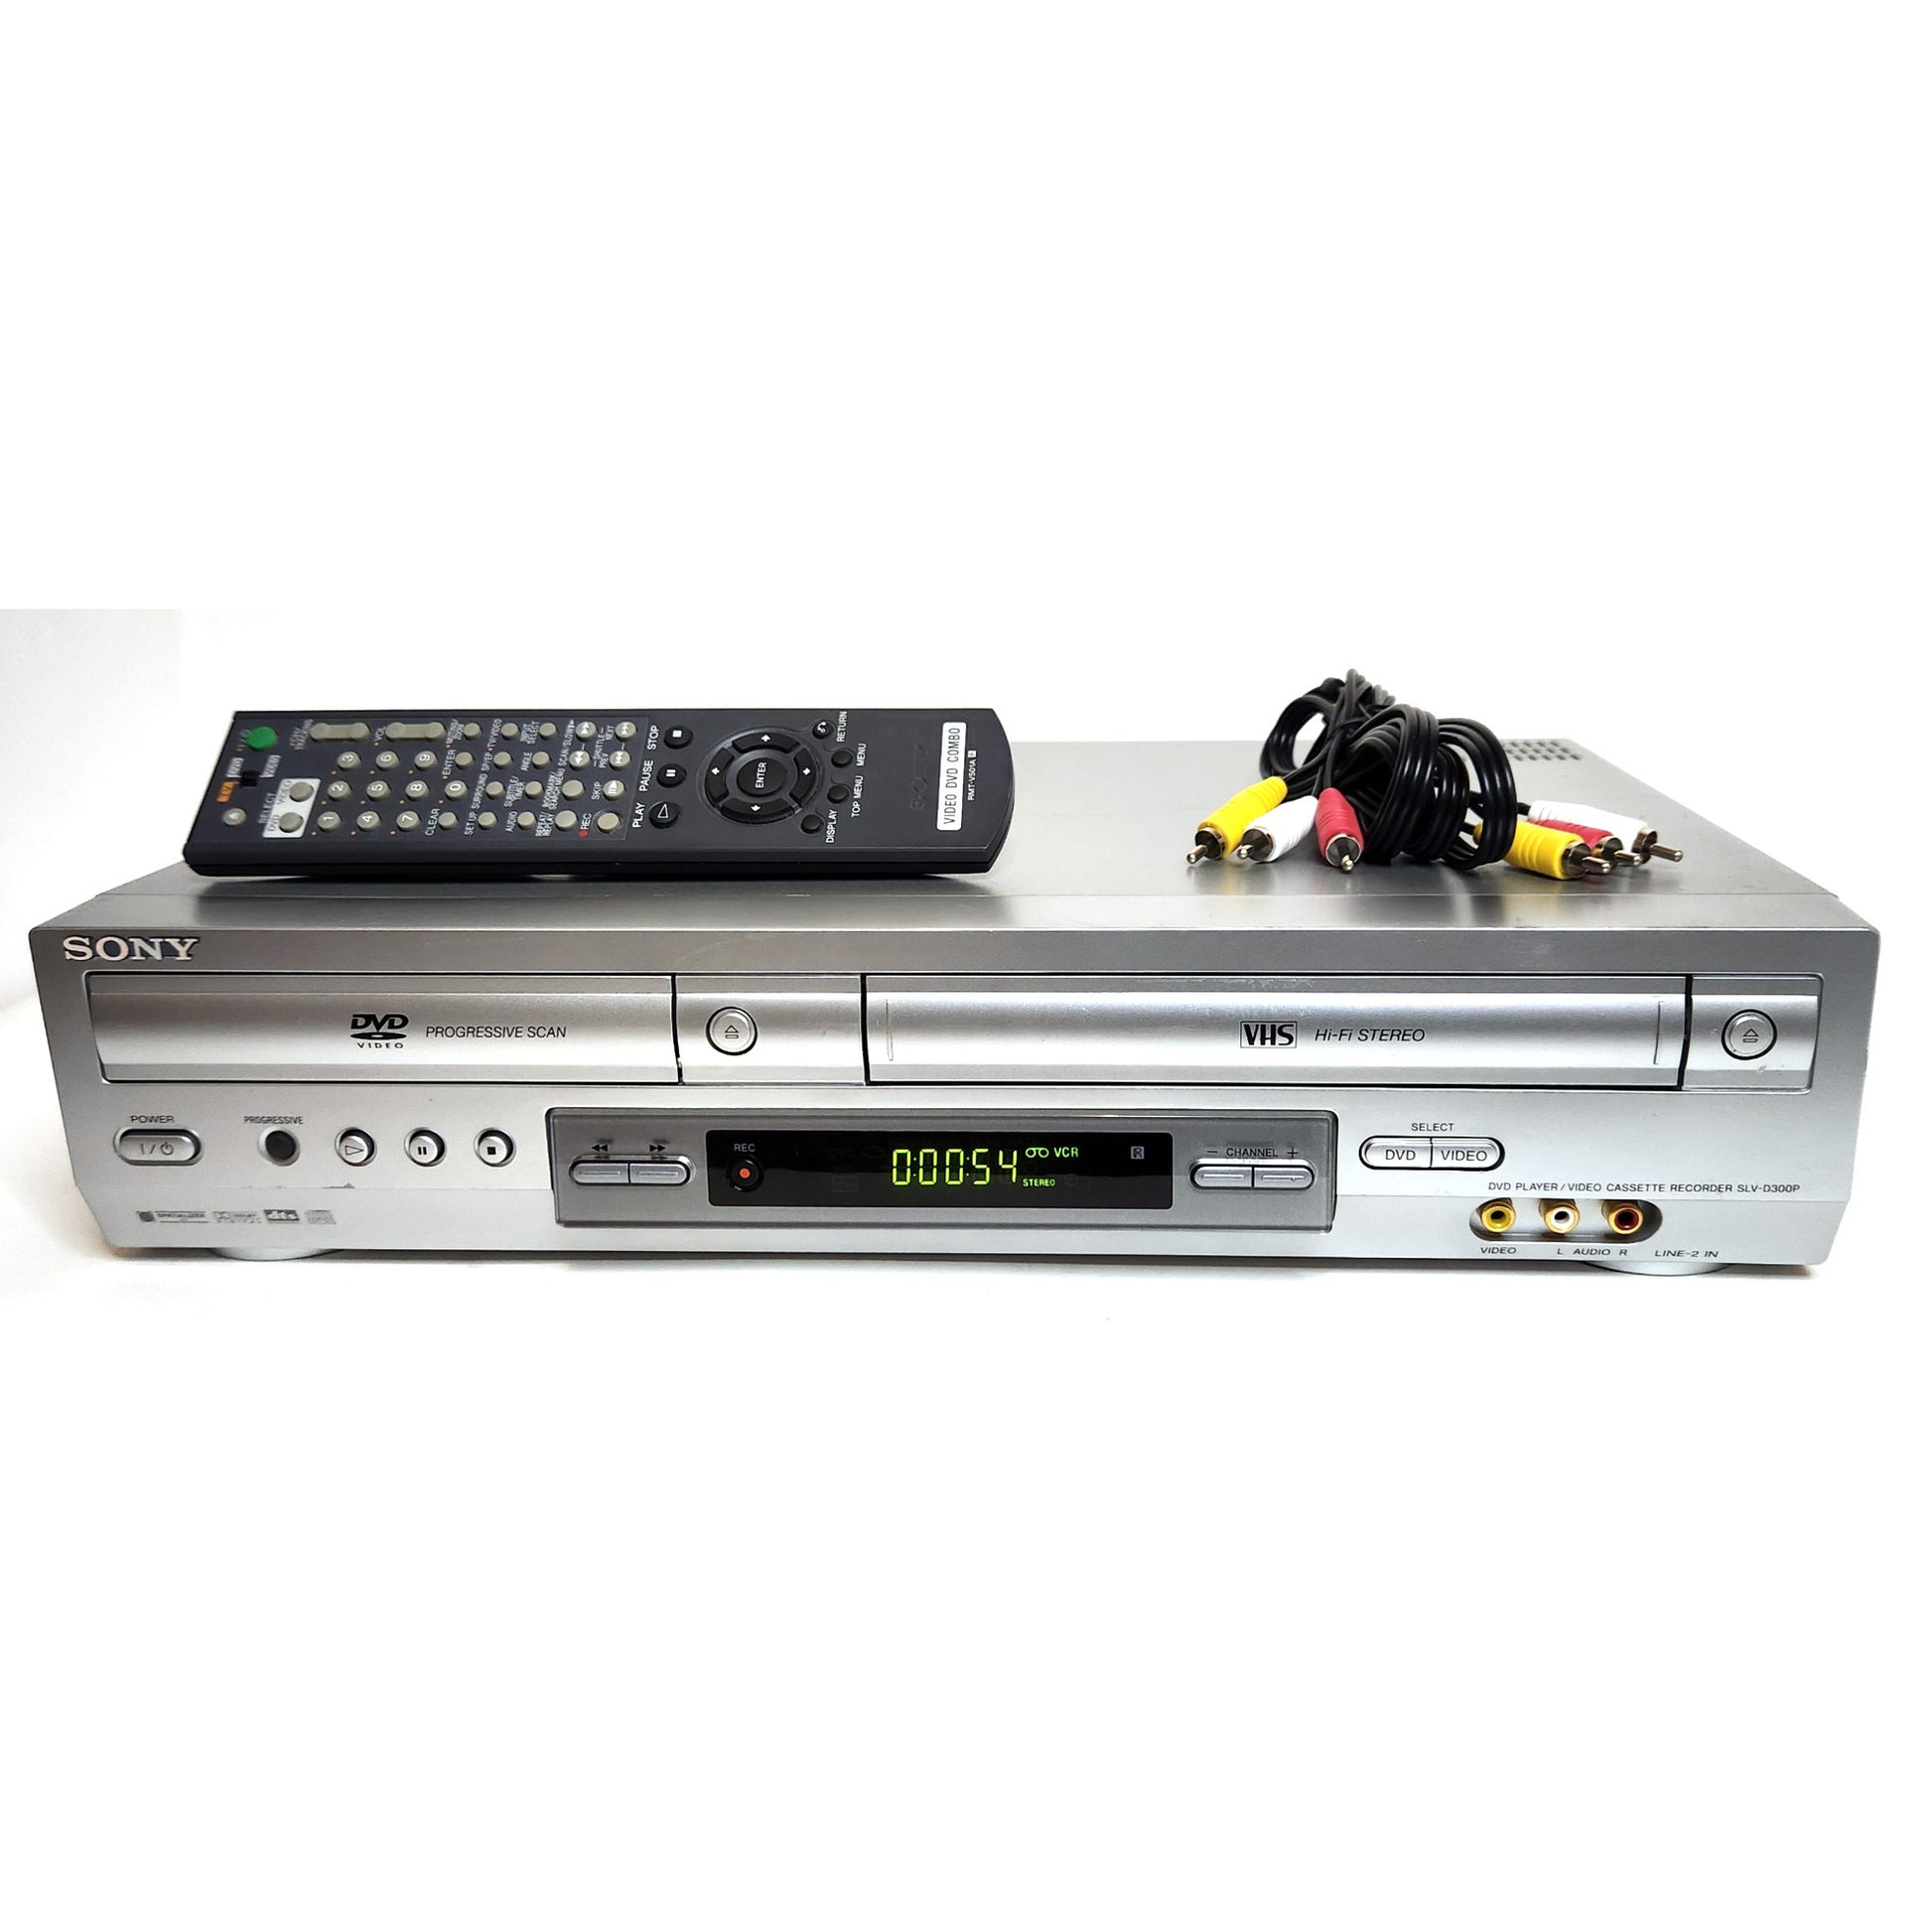 Sony SLV-D300P VCR/DVD Player Combo